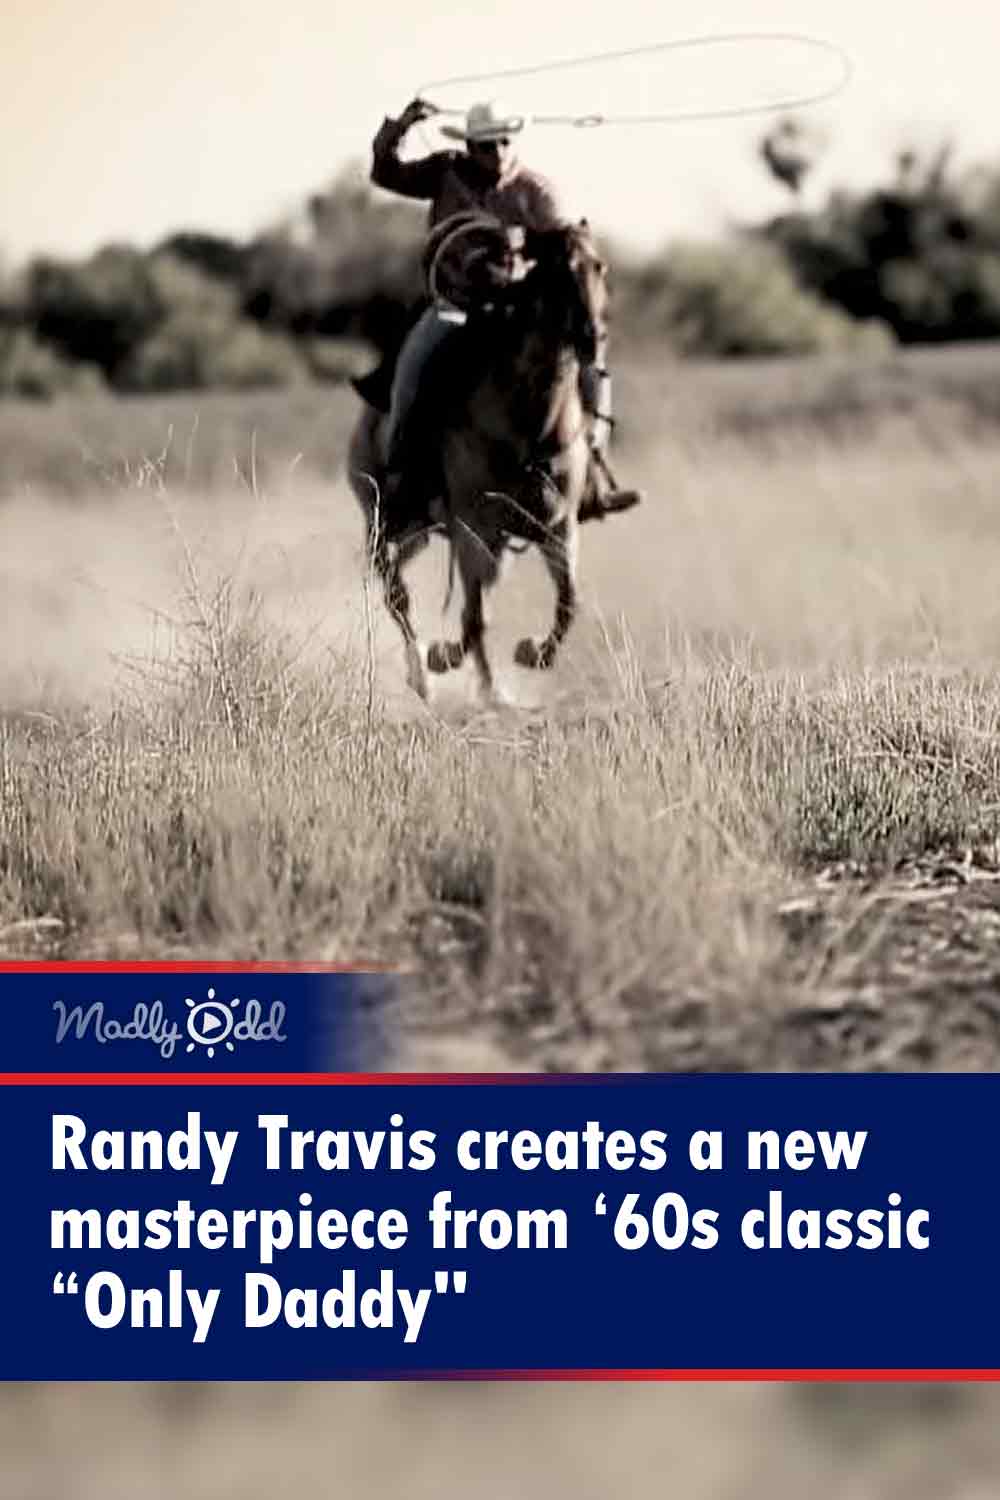 Randy Travis creates a new masterpiece from ‘60s classic “Only Daddy\